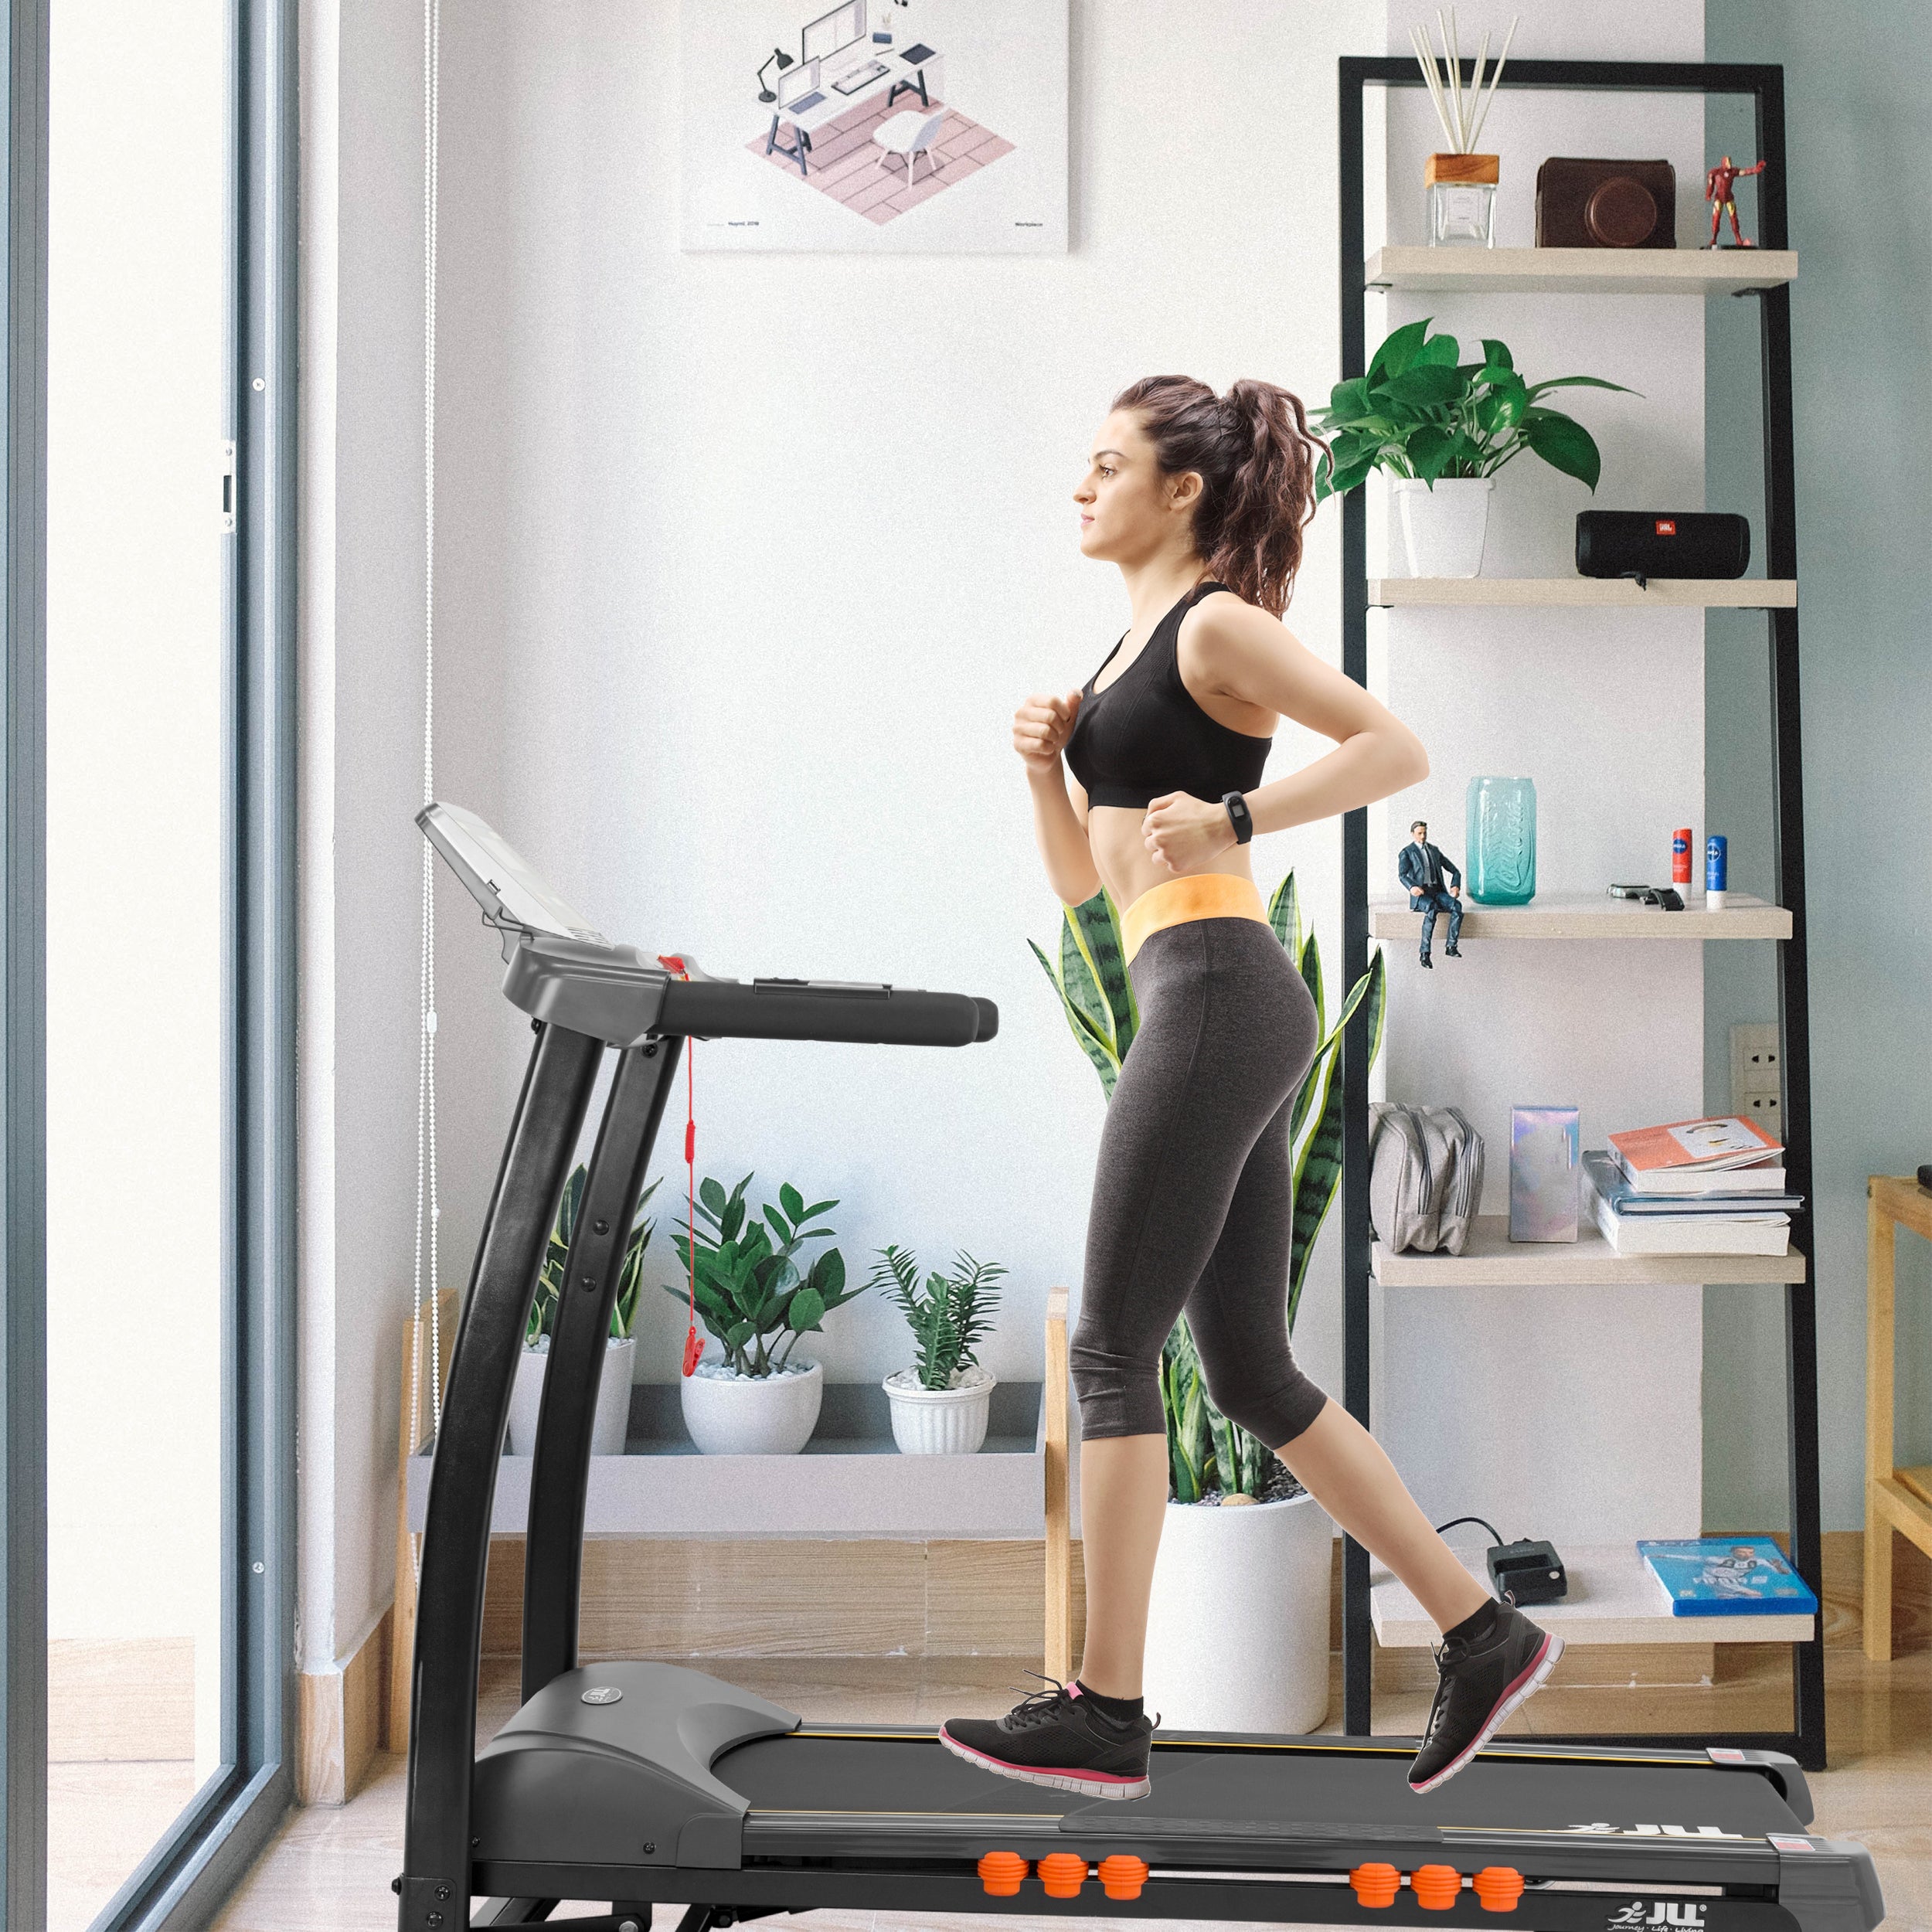 Are Home Cardio Workouts Effective?